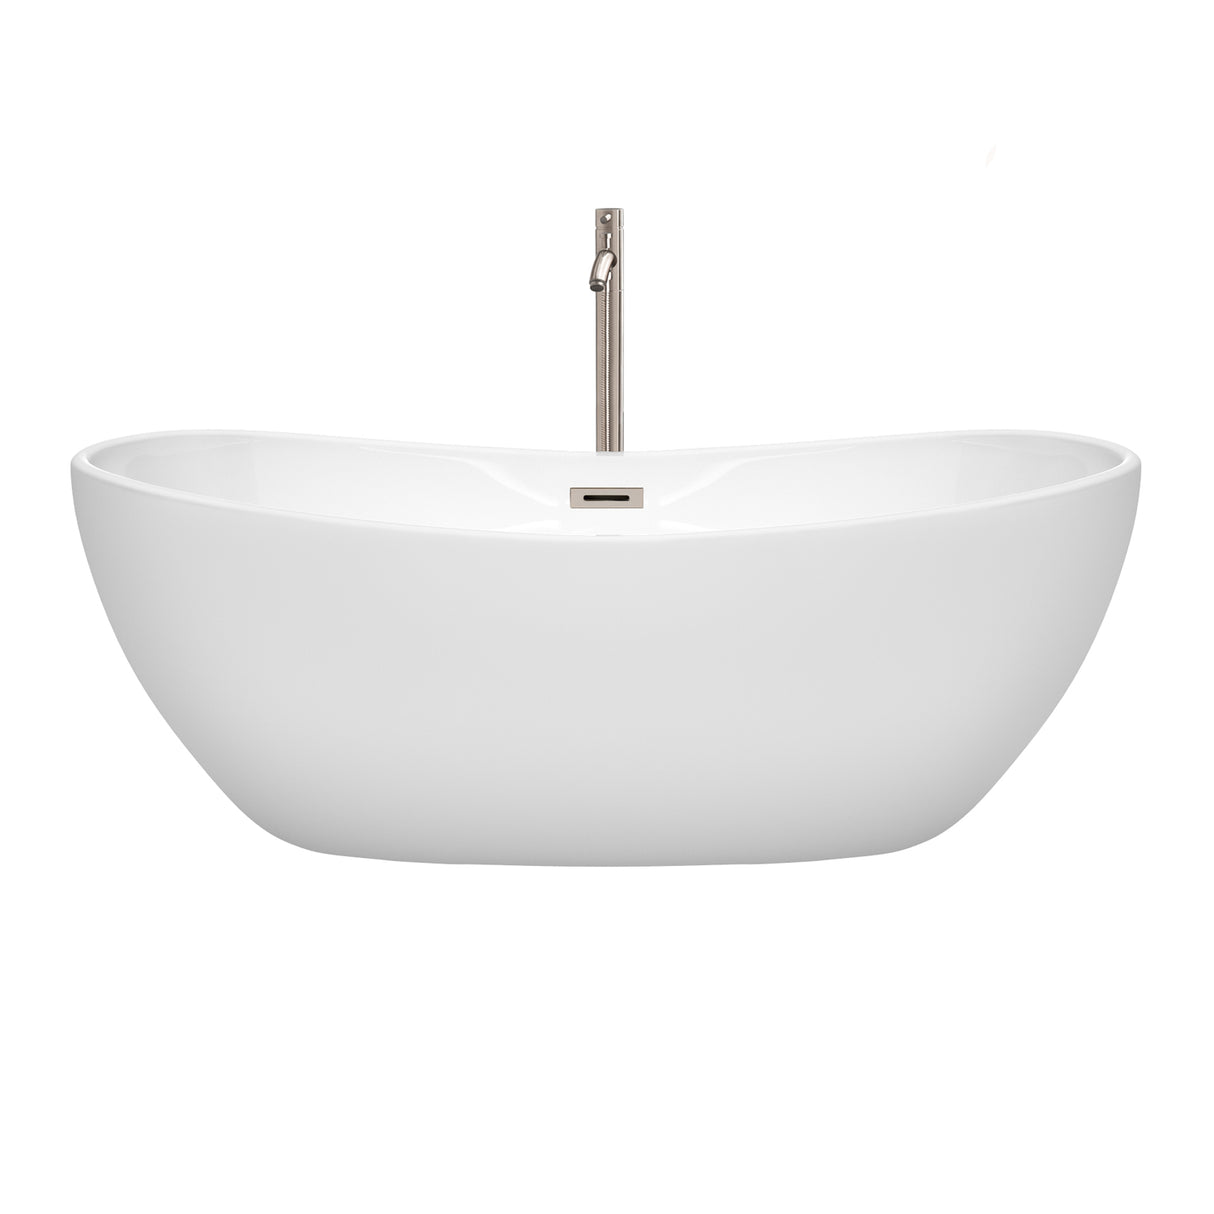 Rebecca 65 Inch Freestanding Bathtub in White with Floor Mounted Faucet Drain and Overflow Trim in Brushed Nickel